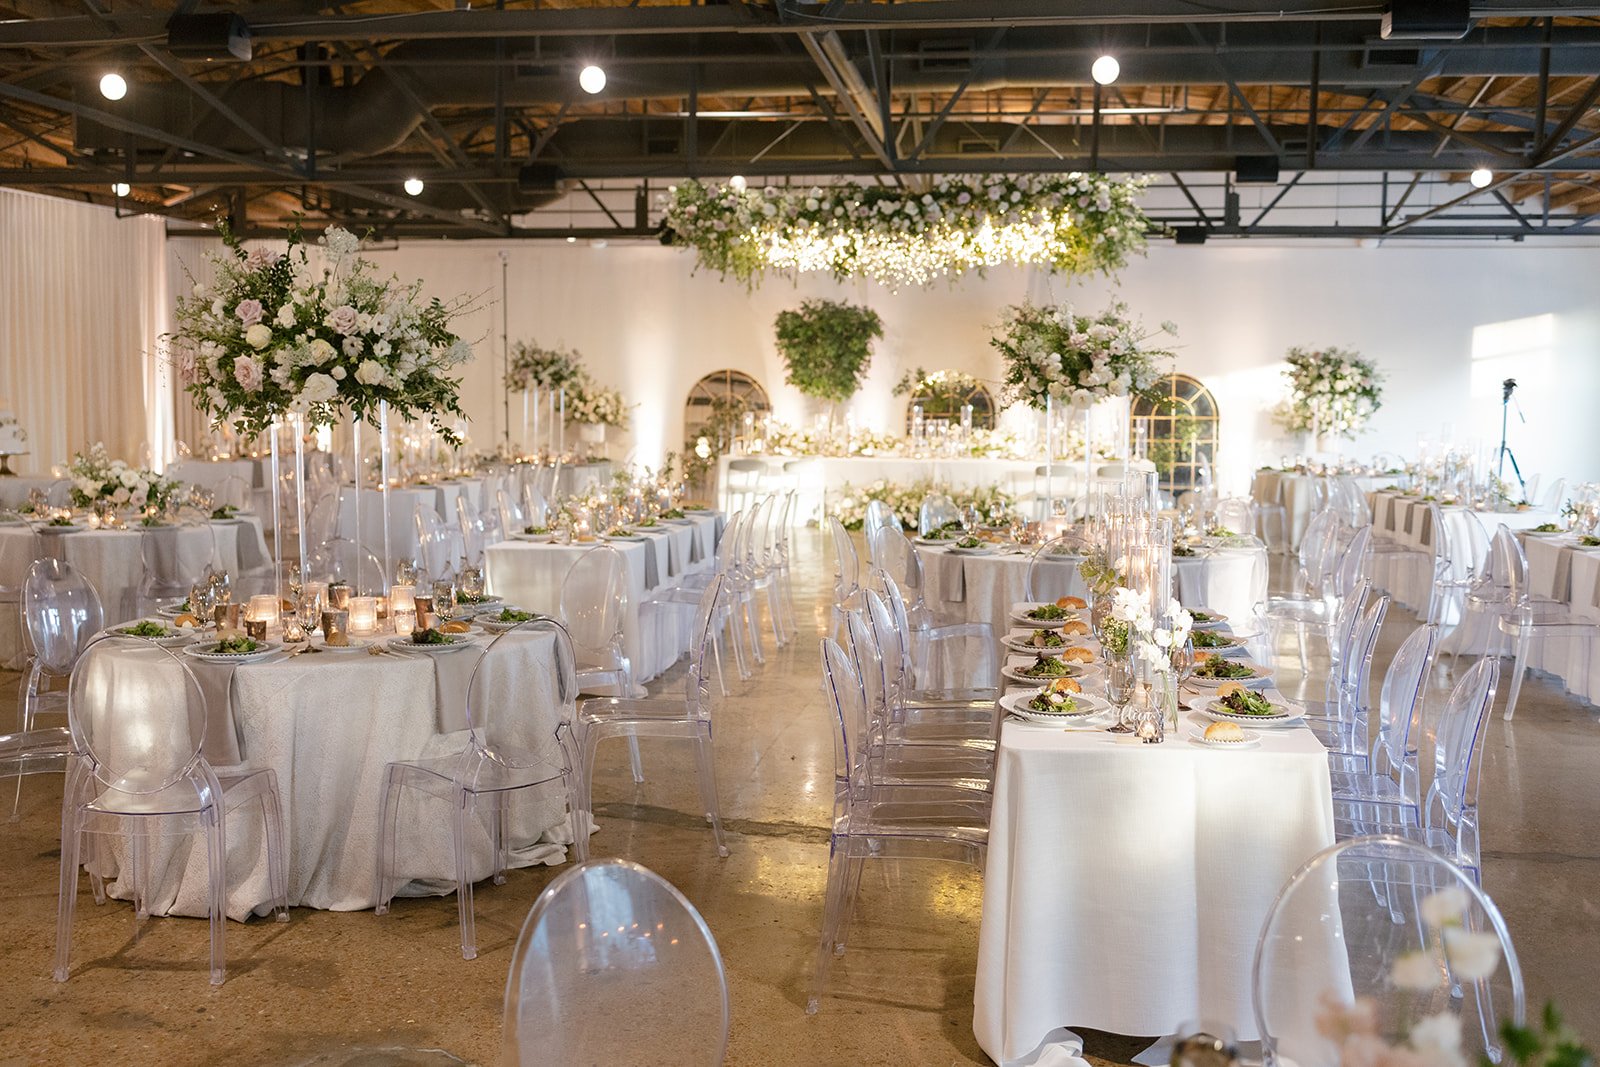 Classic white, cream, and blush wedding flowers. Florals composed of roses, ranunculus, Queen Anne’s lace, and greenery. Designed by Rosemary and Finch in Nashville, TN.